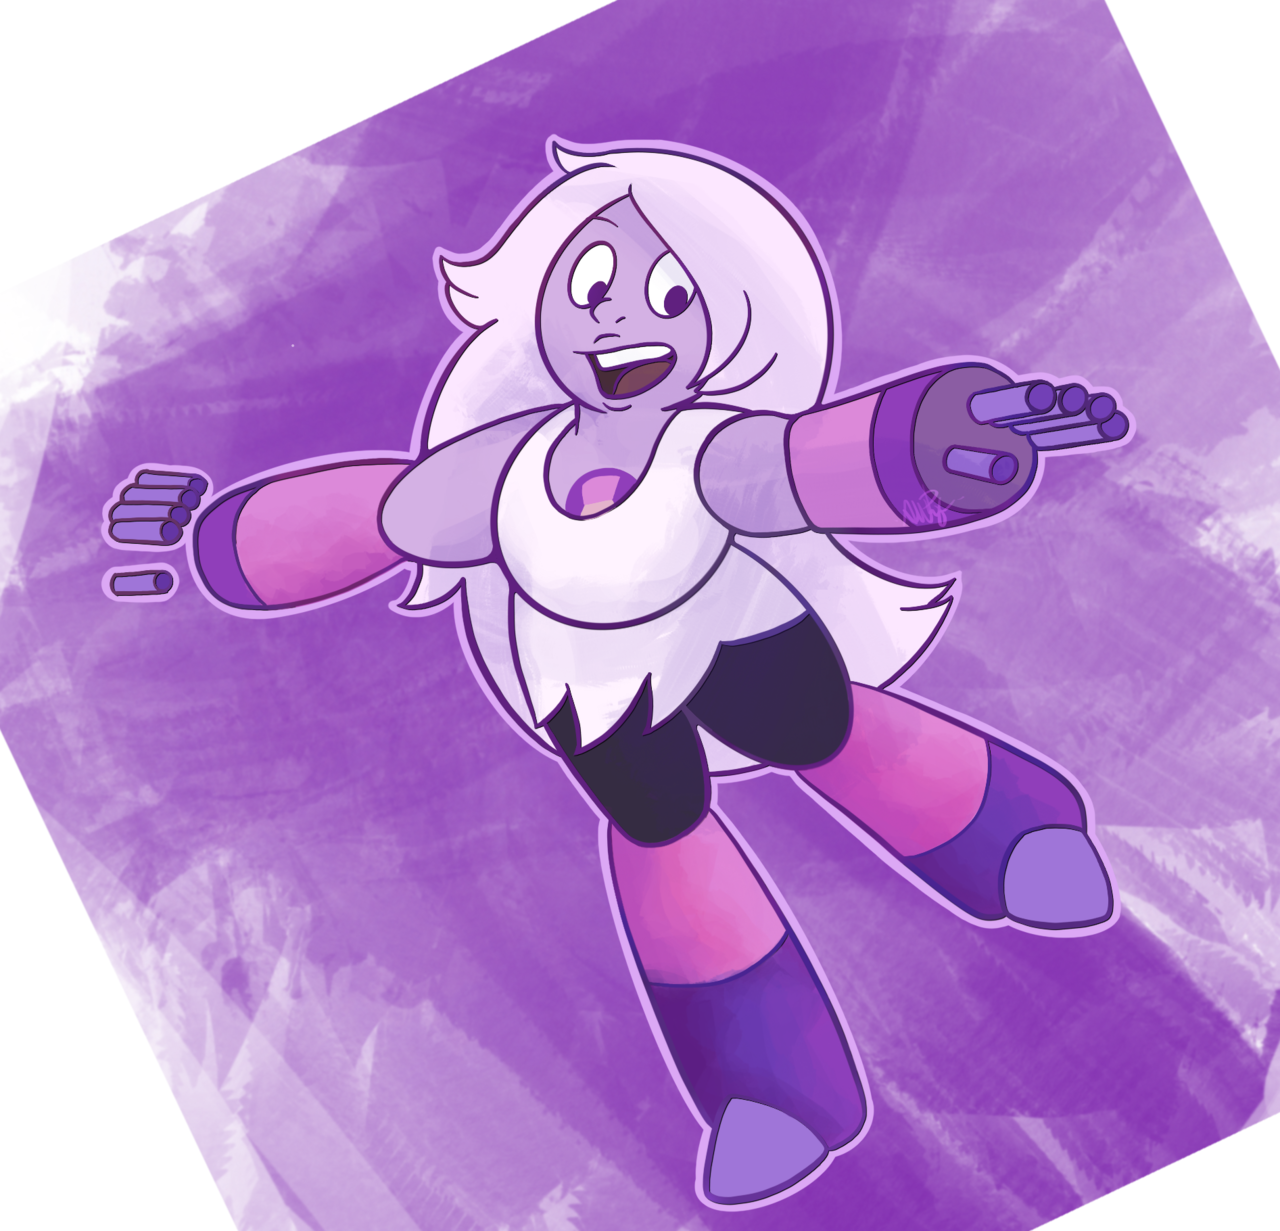 I never knew I needed Amethyst with limb enhancers until the new episode!